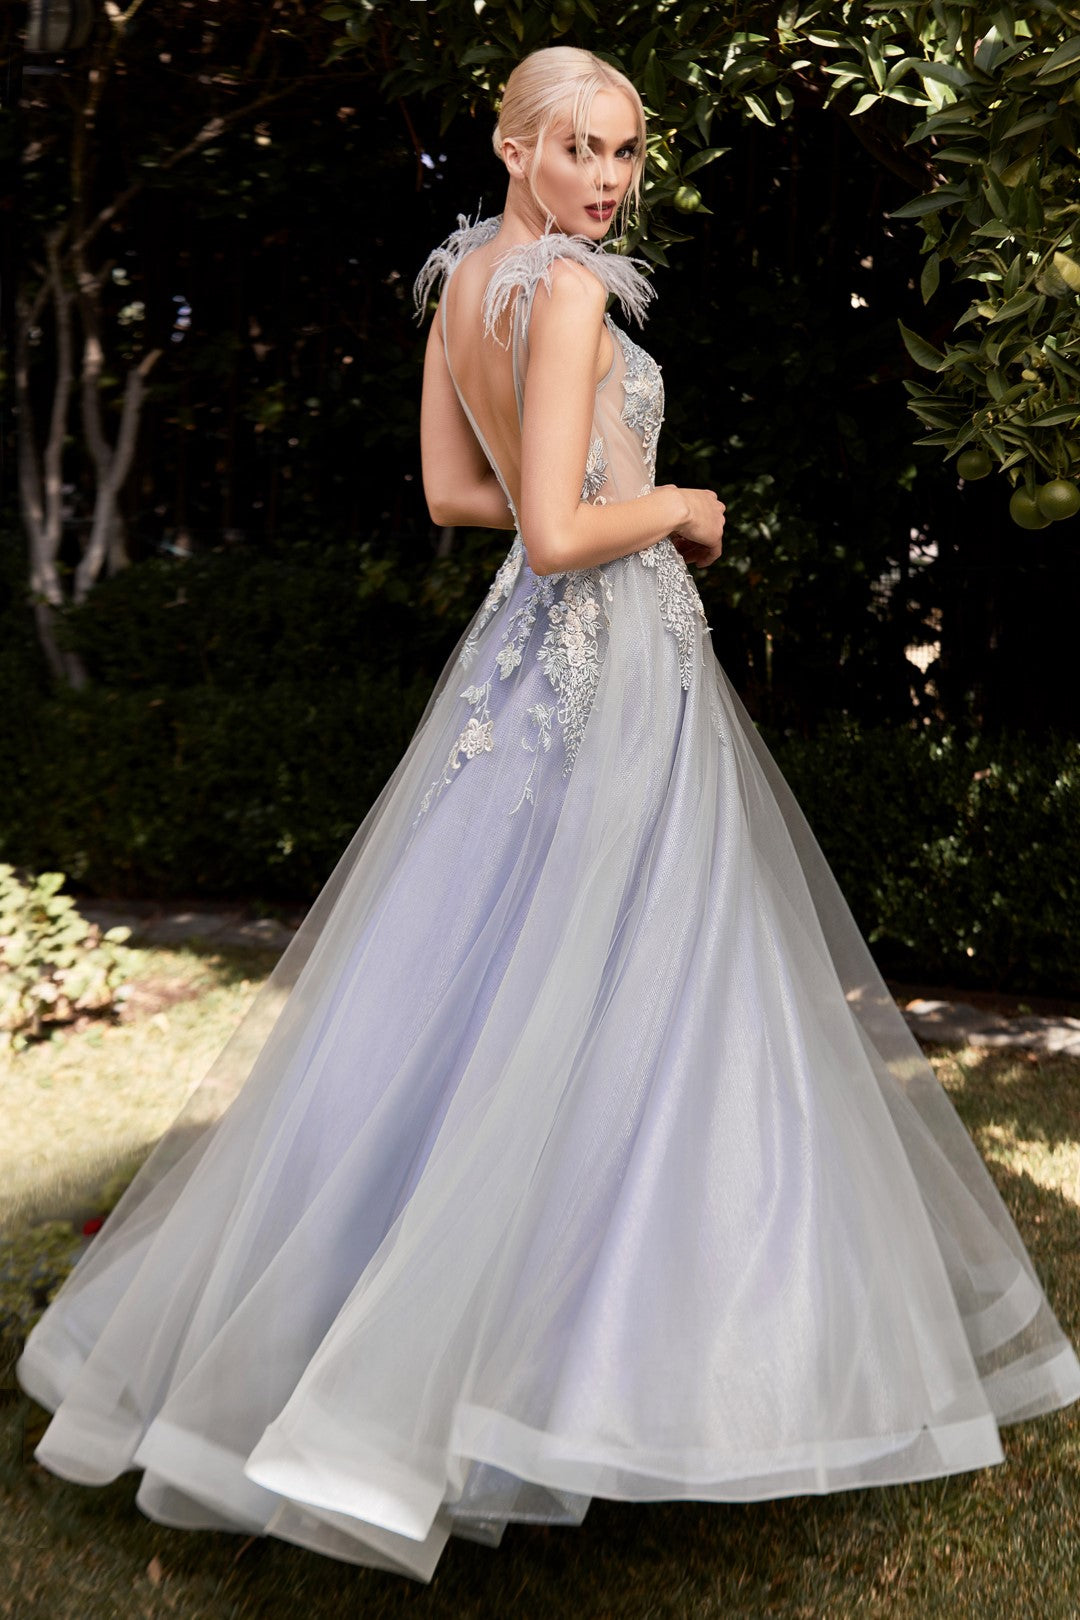 V-Neck A-Line Wedding Dress With Floral Lace Appliques and Pleated Tulle  Skirt - June Bridals